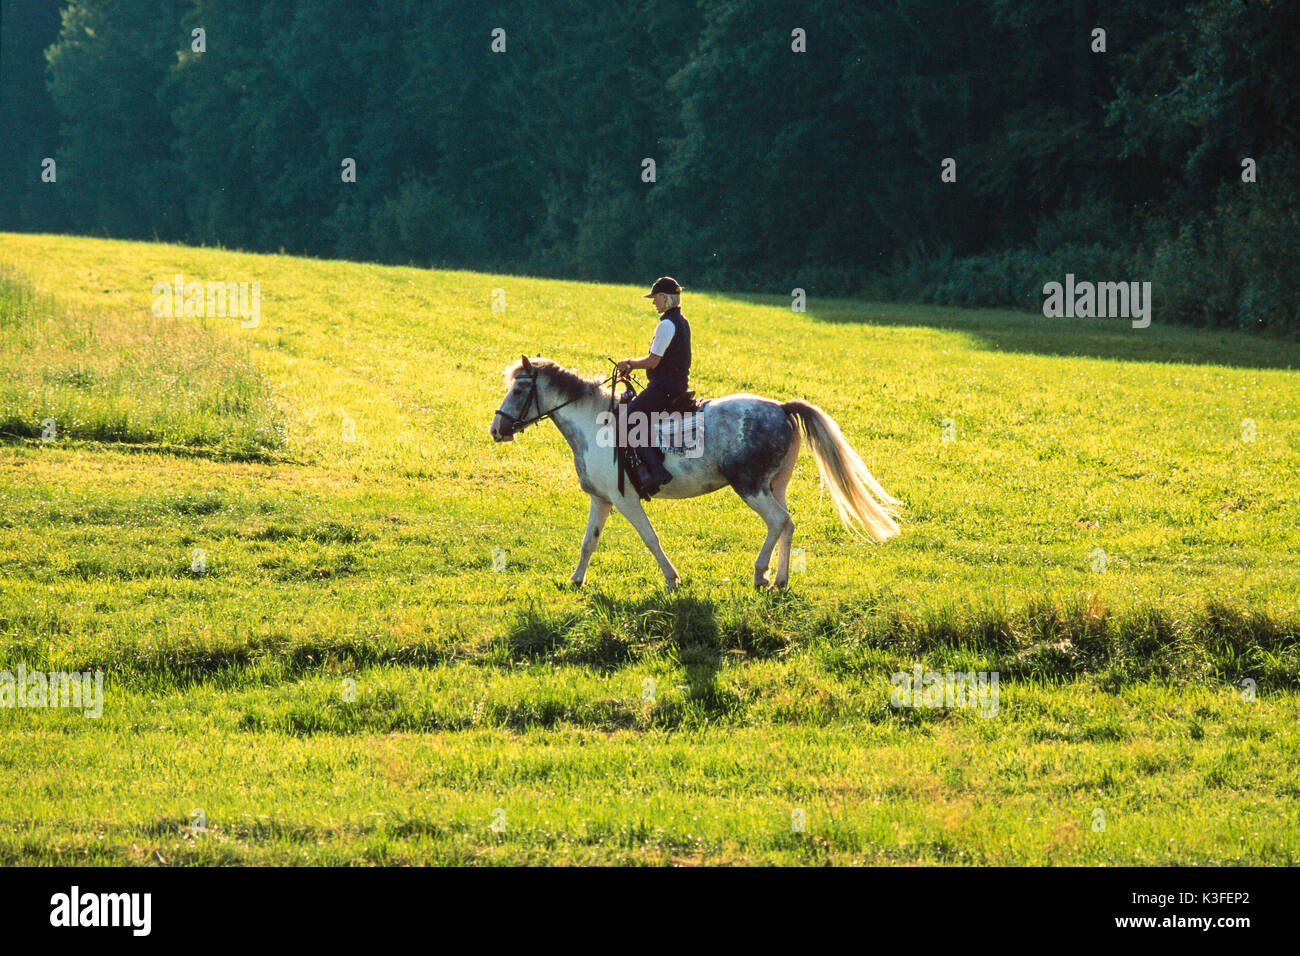 Woman at the horse riding Stock Photo